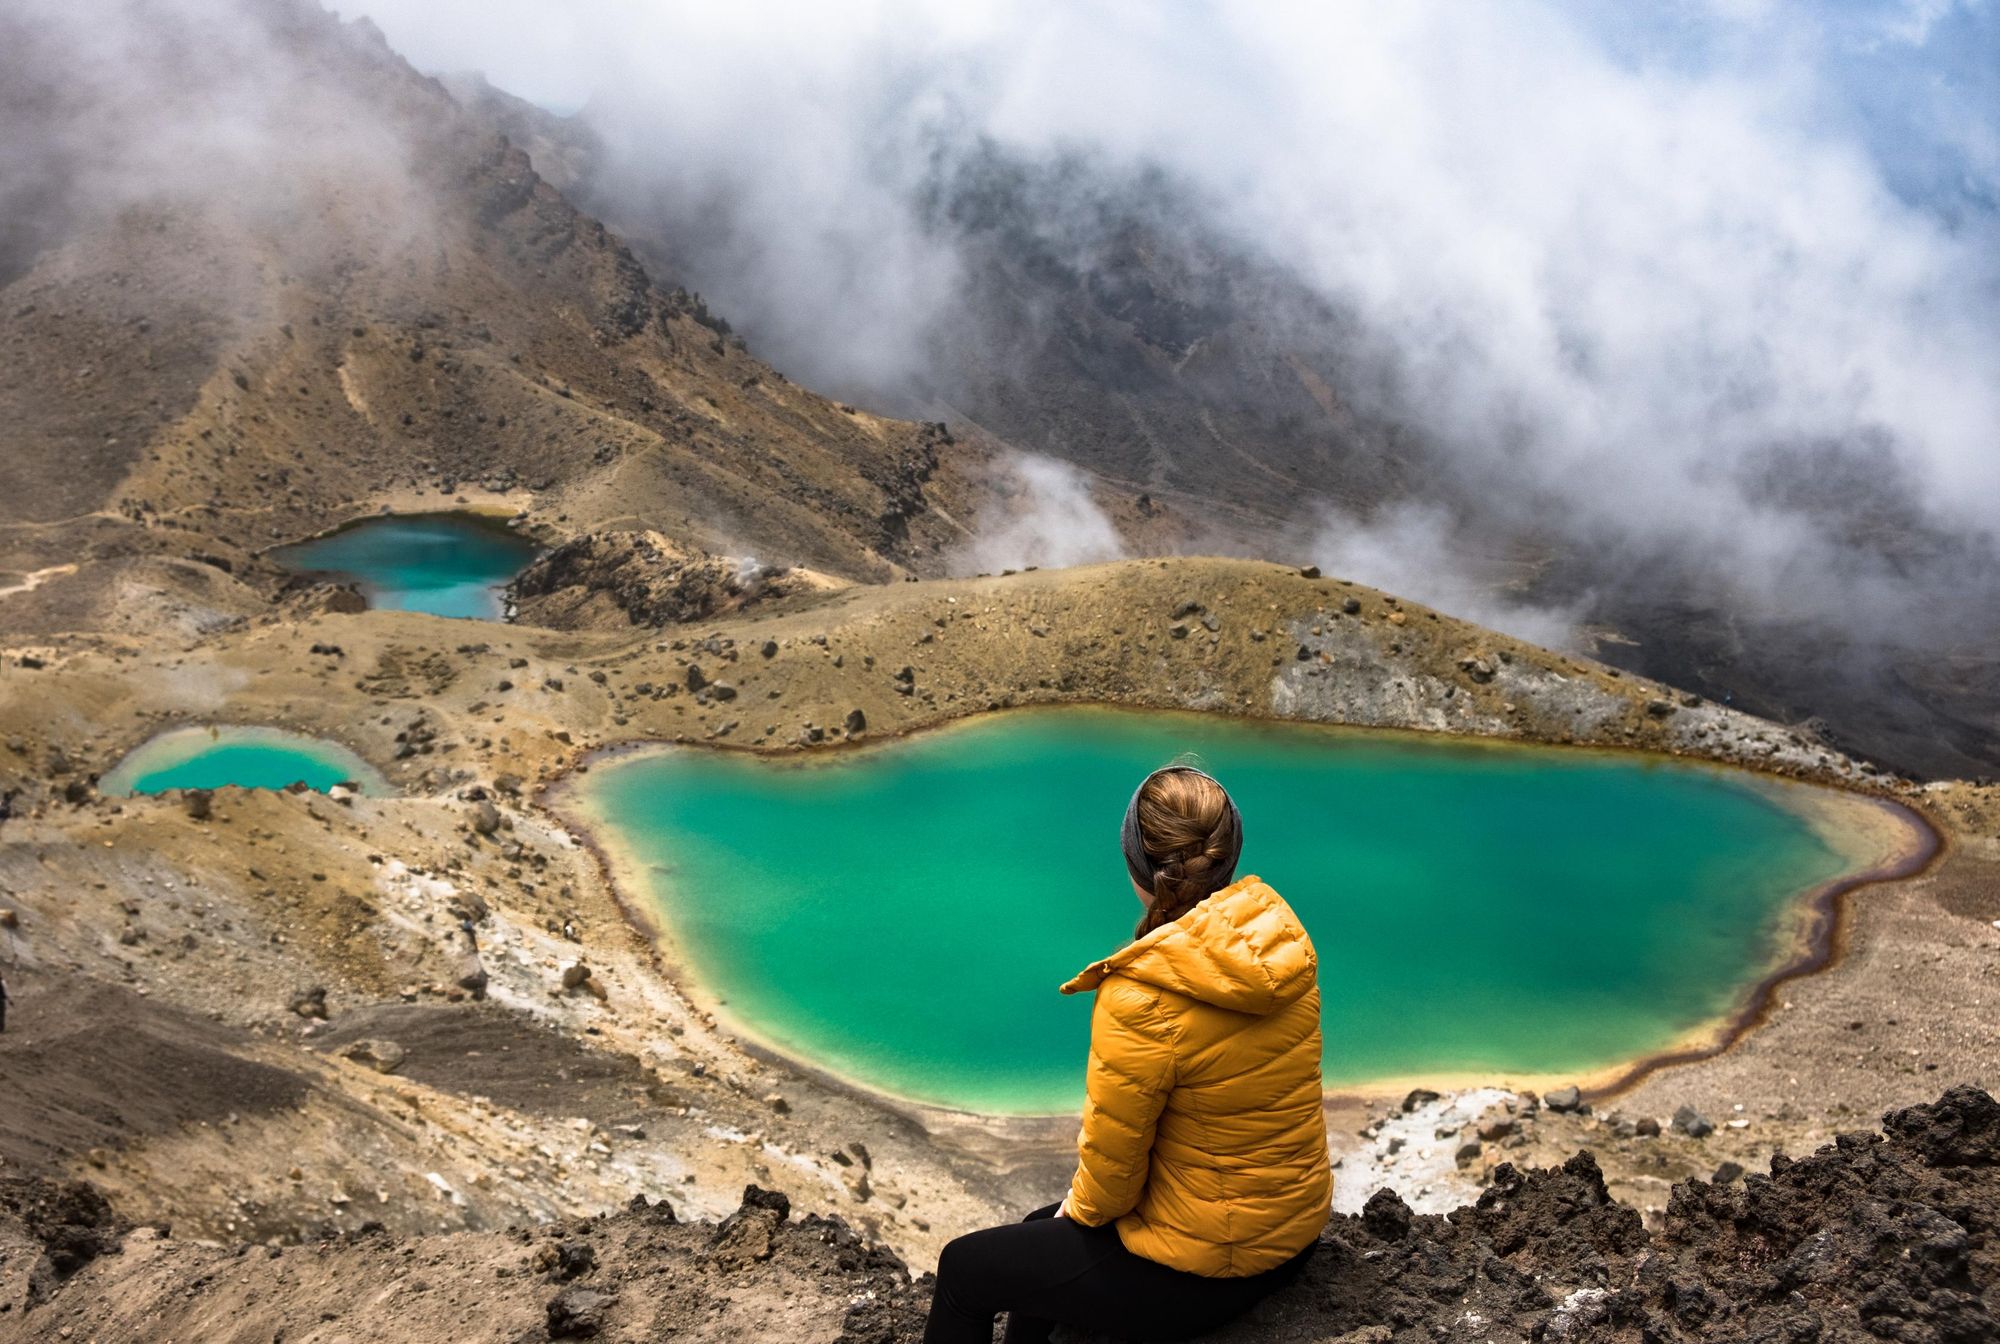 The emerald lakes, pictured on the famous Tongariro Alpine Crossing. Photo: Getty